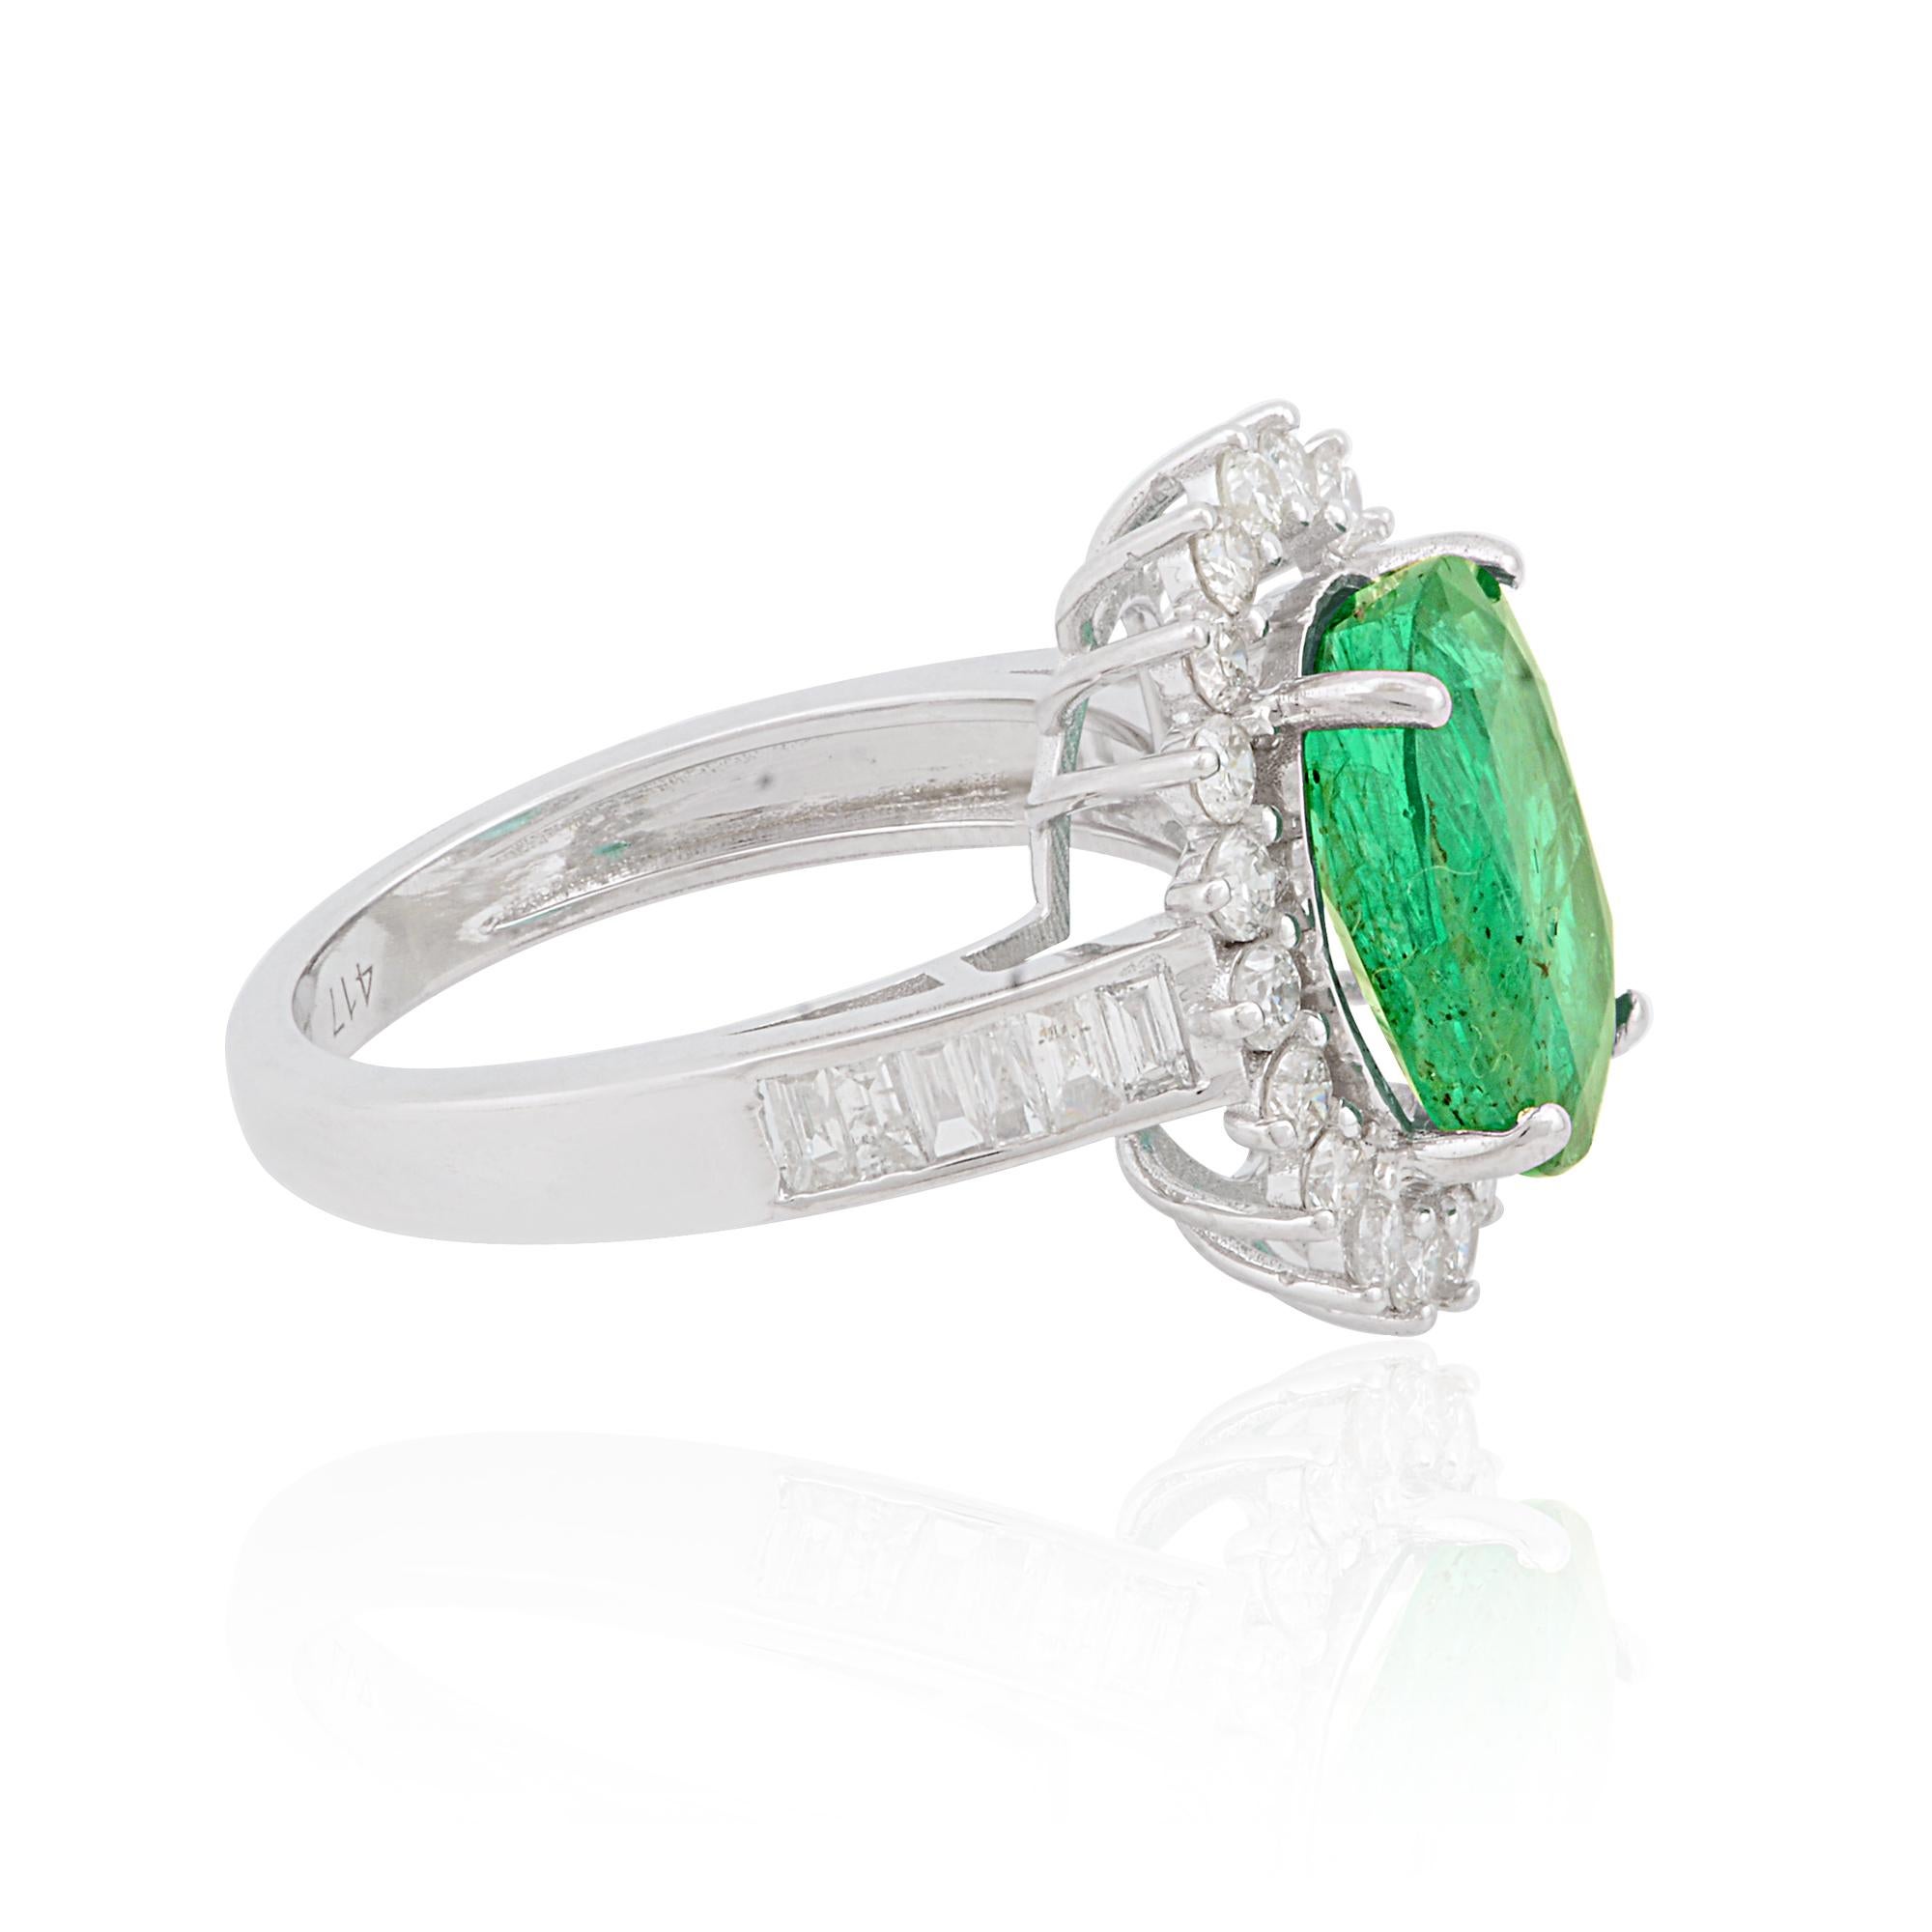 For Sale:  Oval Natural Emerald Gemstone Cocktail Ring Diamond 10 Karat White Gold Jewelry 2